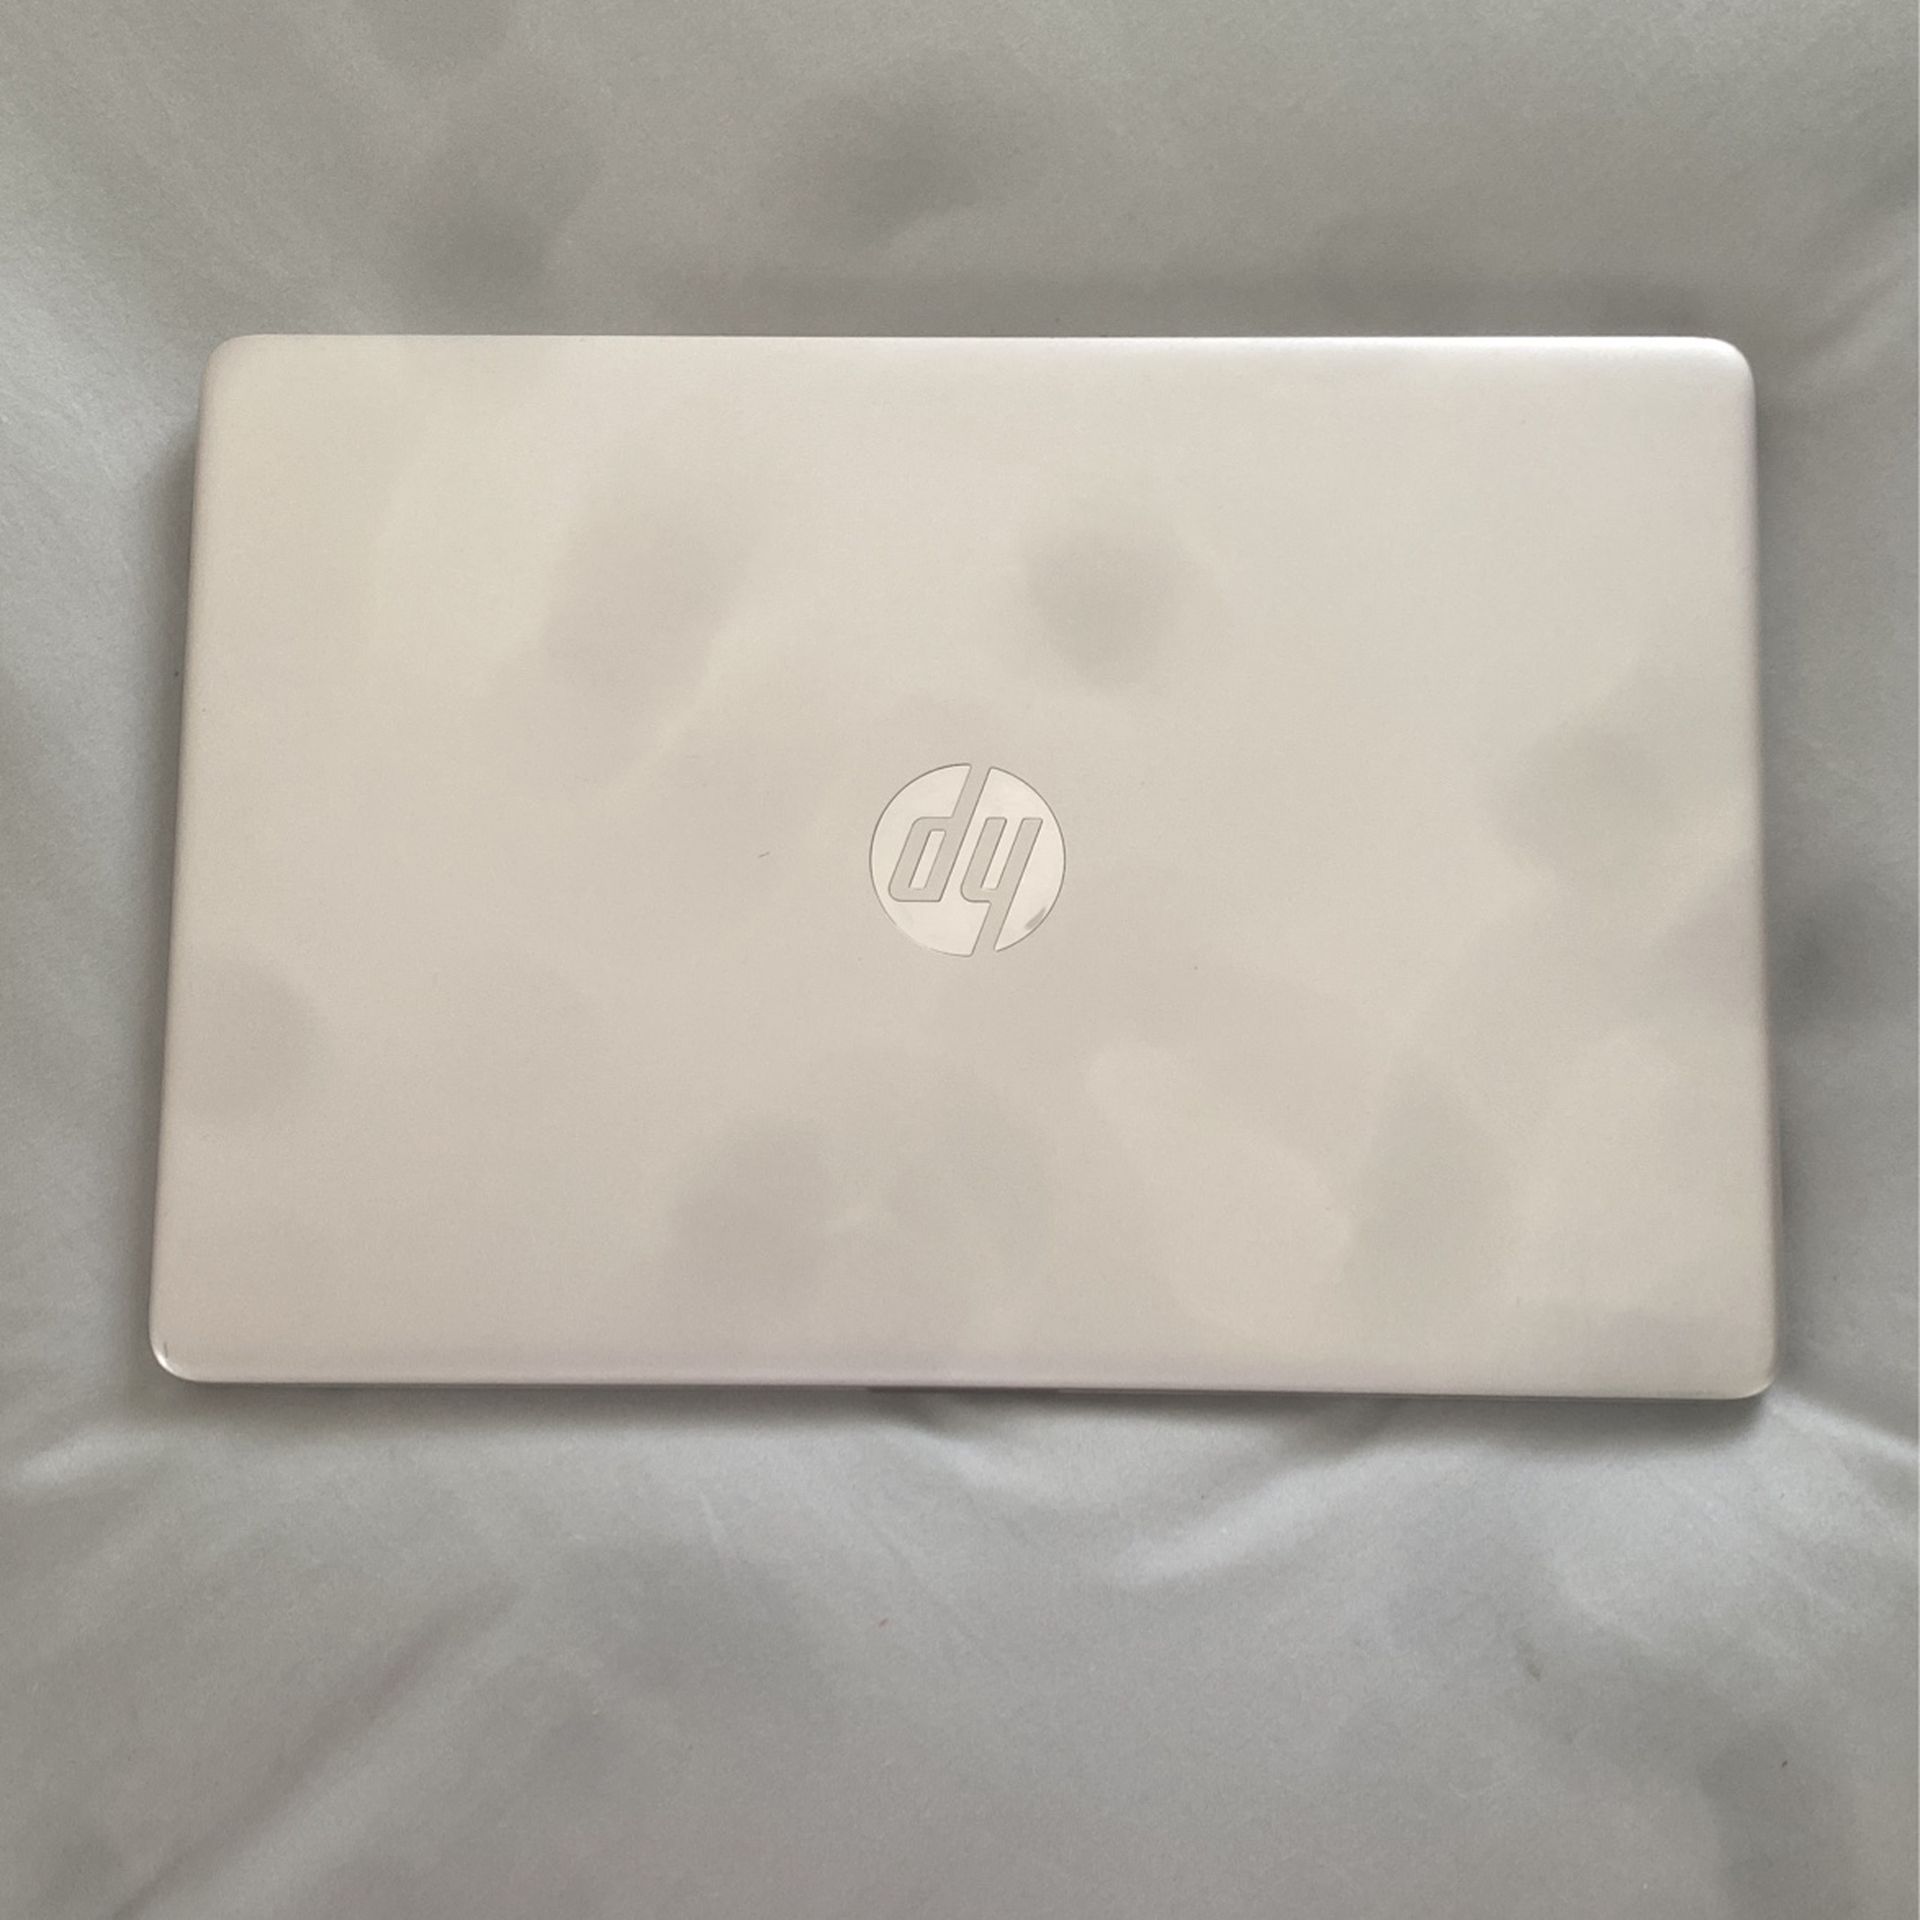 HP Laptop 10gen i5 With Upgrades $300